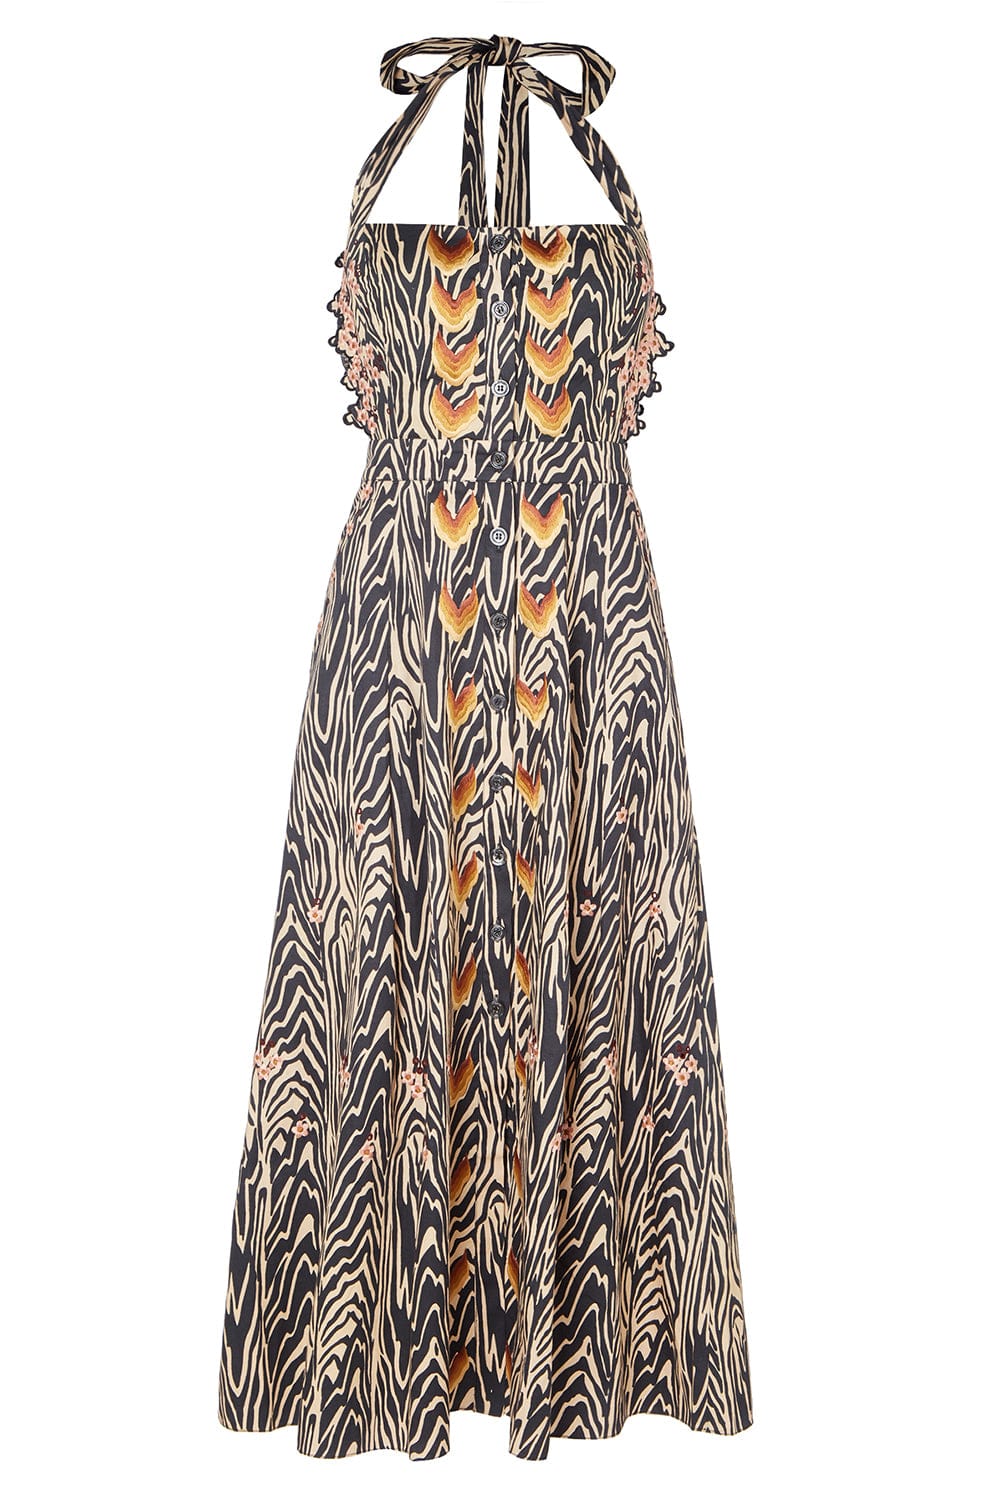 Valerie Print Strappy Dress CLOTHINGDRESSCASUAL TEMPERLEY LONDON   